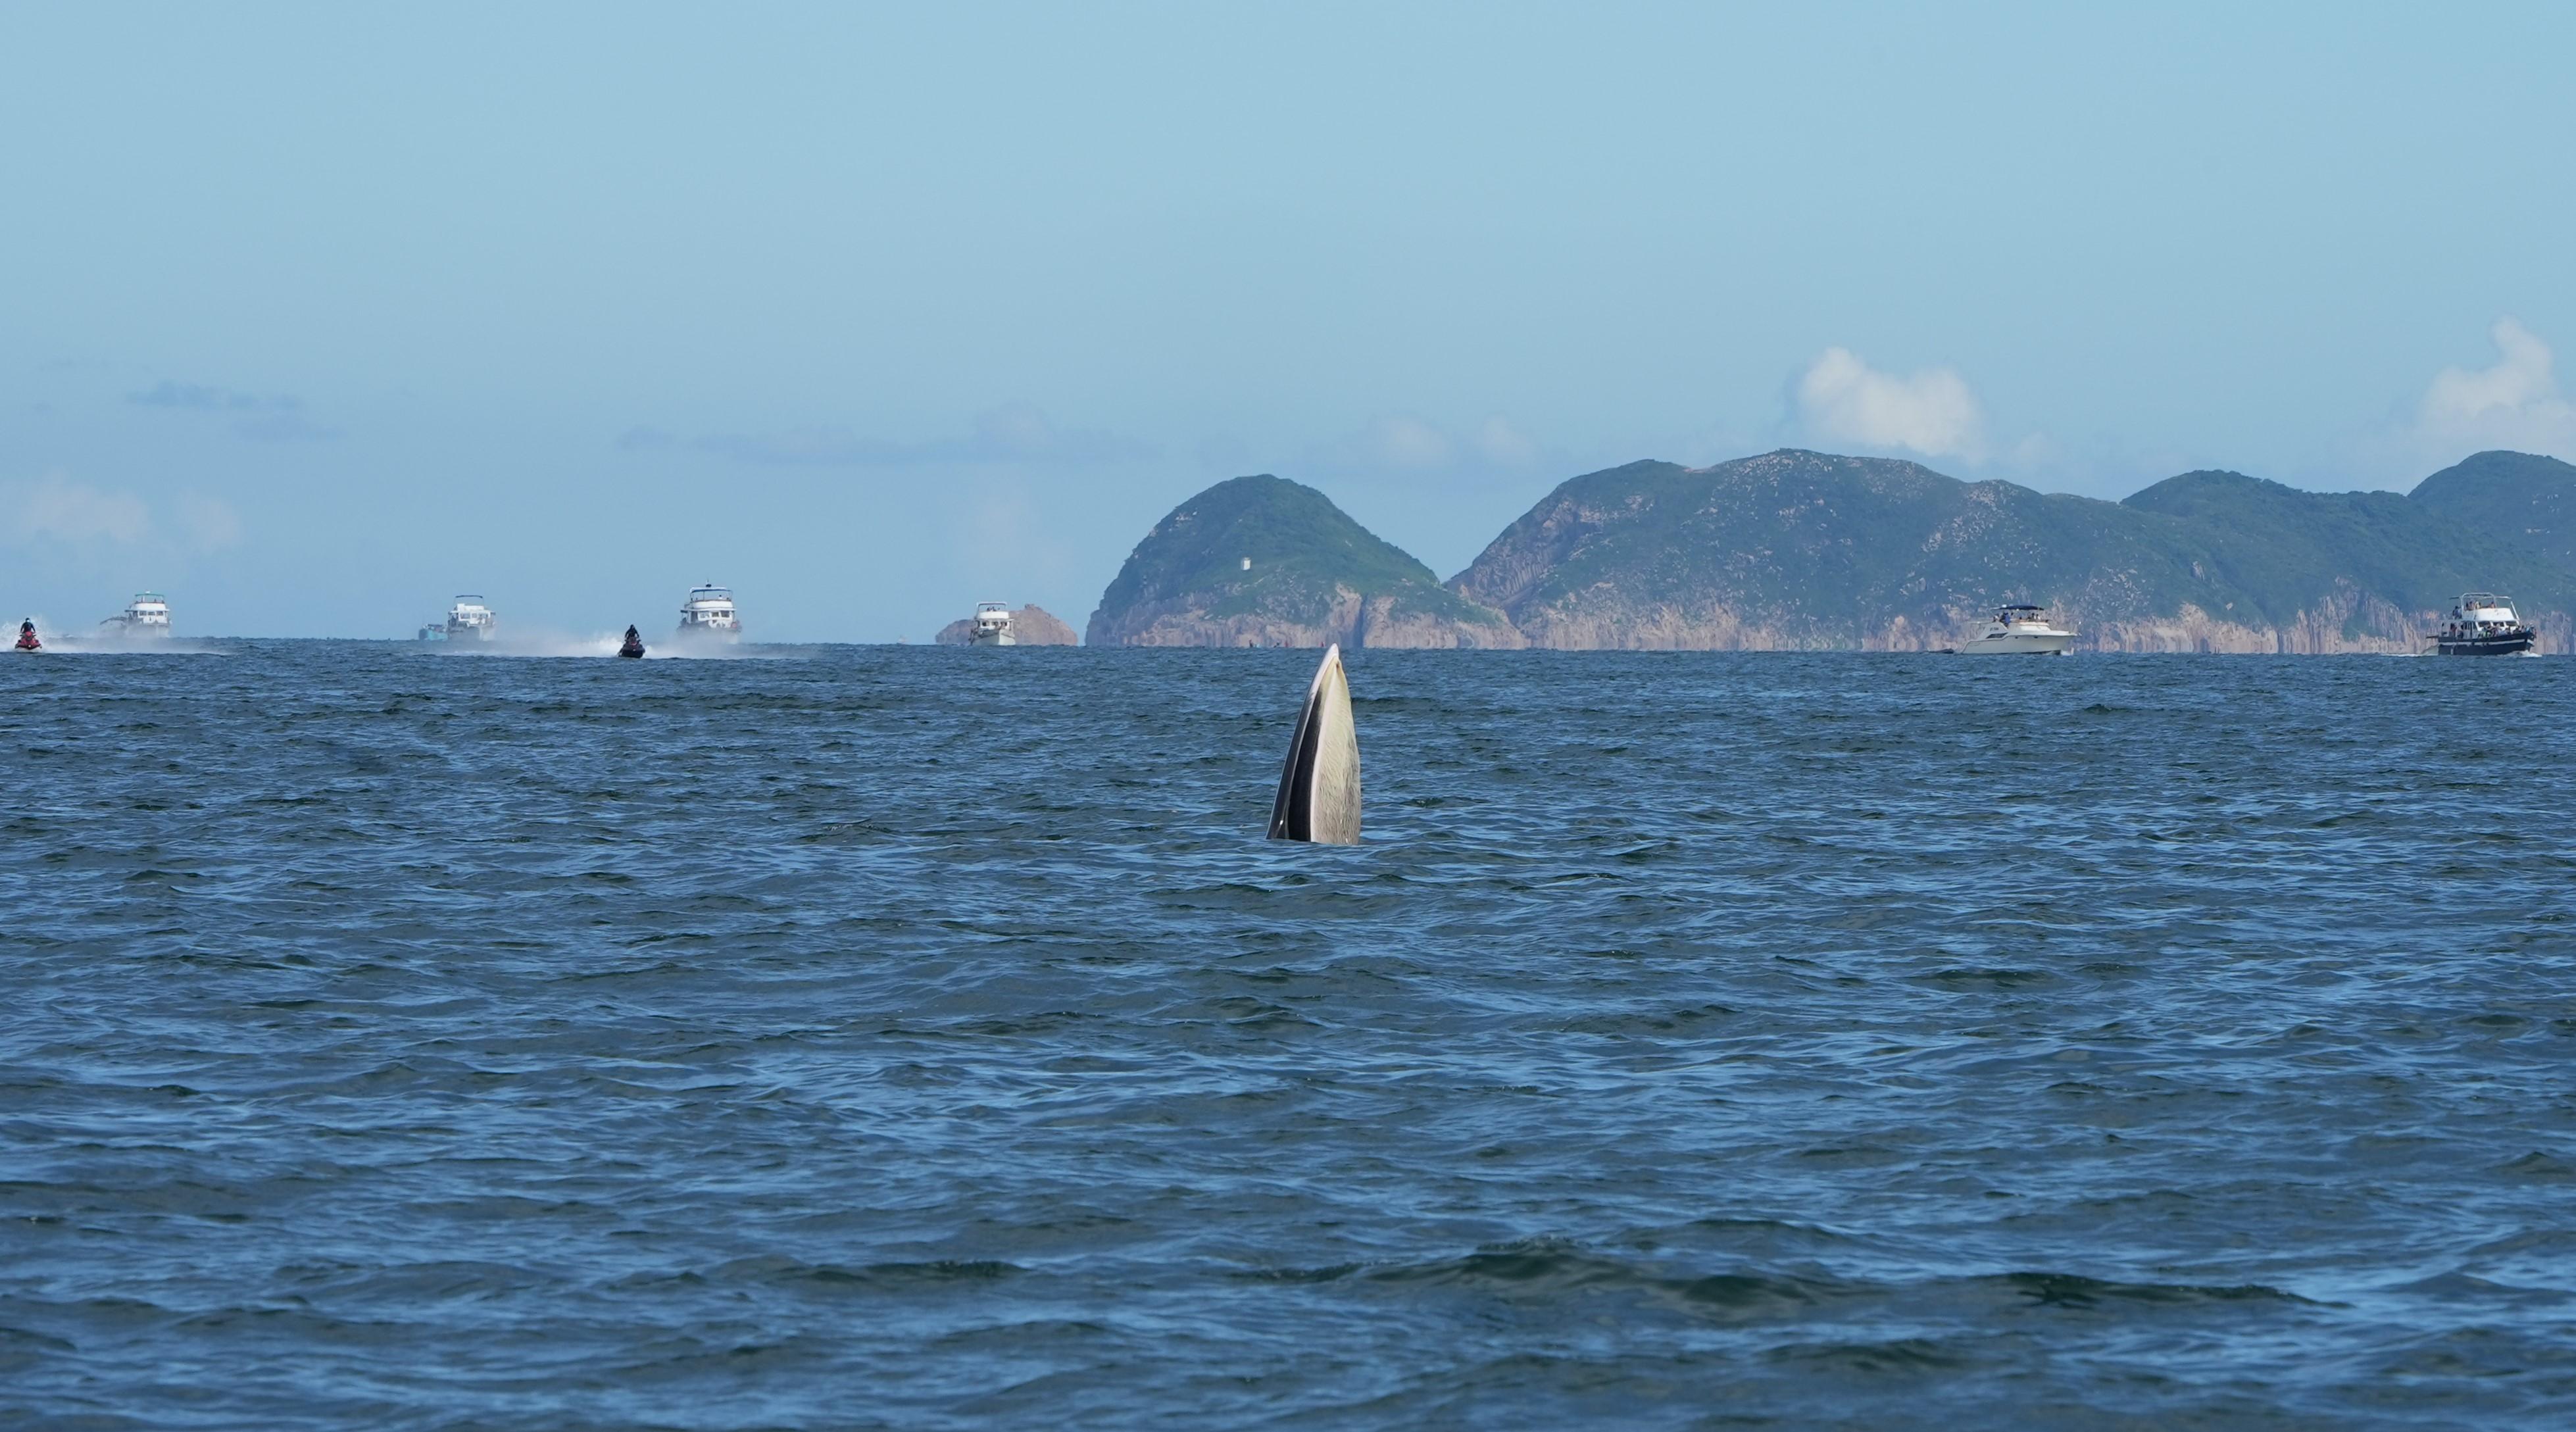 Regarding the recent sighting of a whale in Sai Kung waters, the Agriculture, Fisheries and Conservation Department today (July 26) strongly urges members of the public not to pursue the whale. Photo shows vessels and water sports in waters where the whale has appeared.
